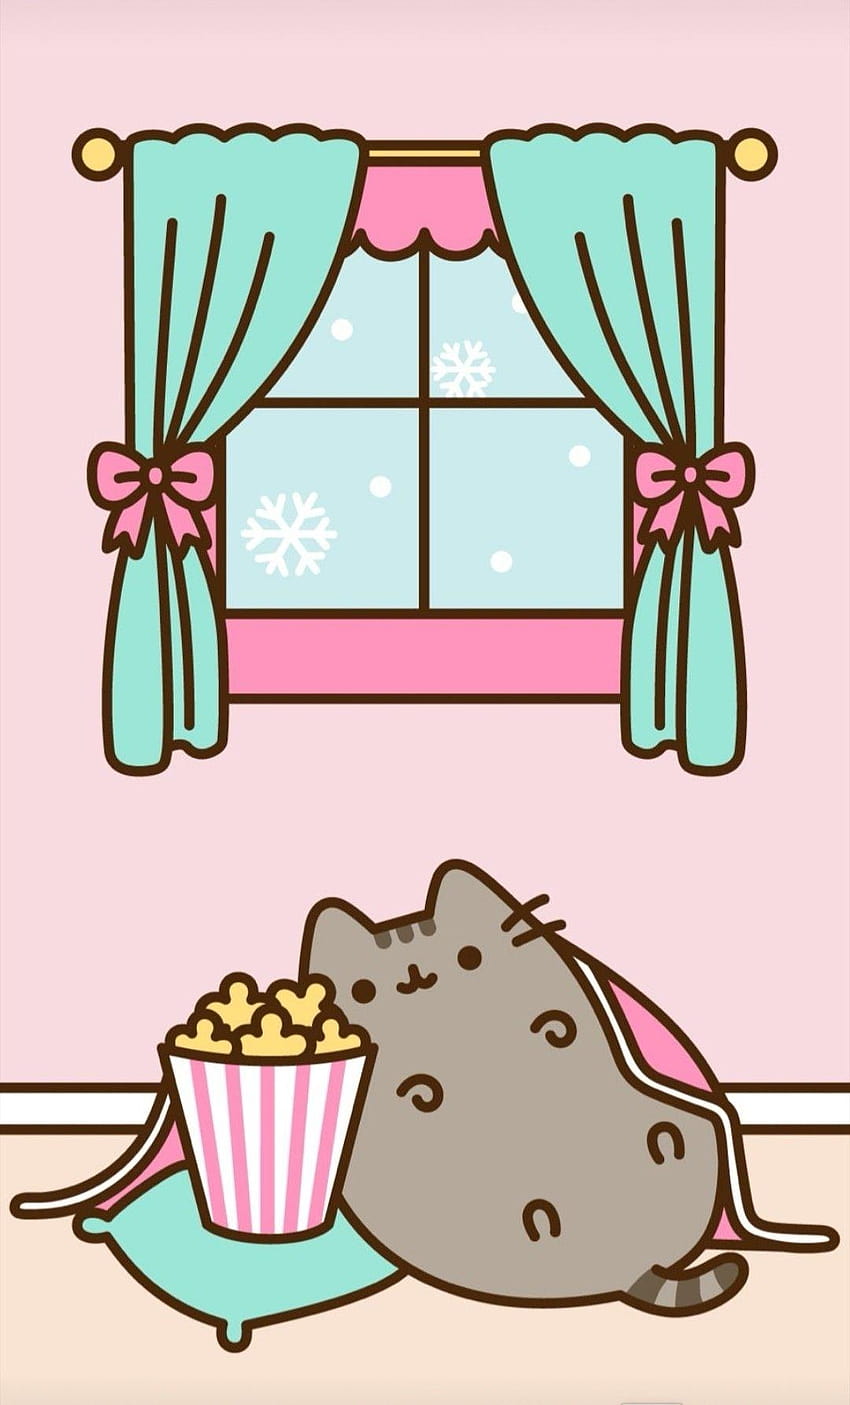 Pusheen snuggling under a warm blanket with some popcorn during a HD phone wallpaper